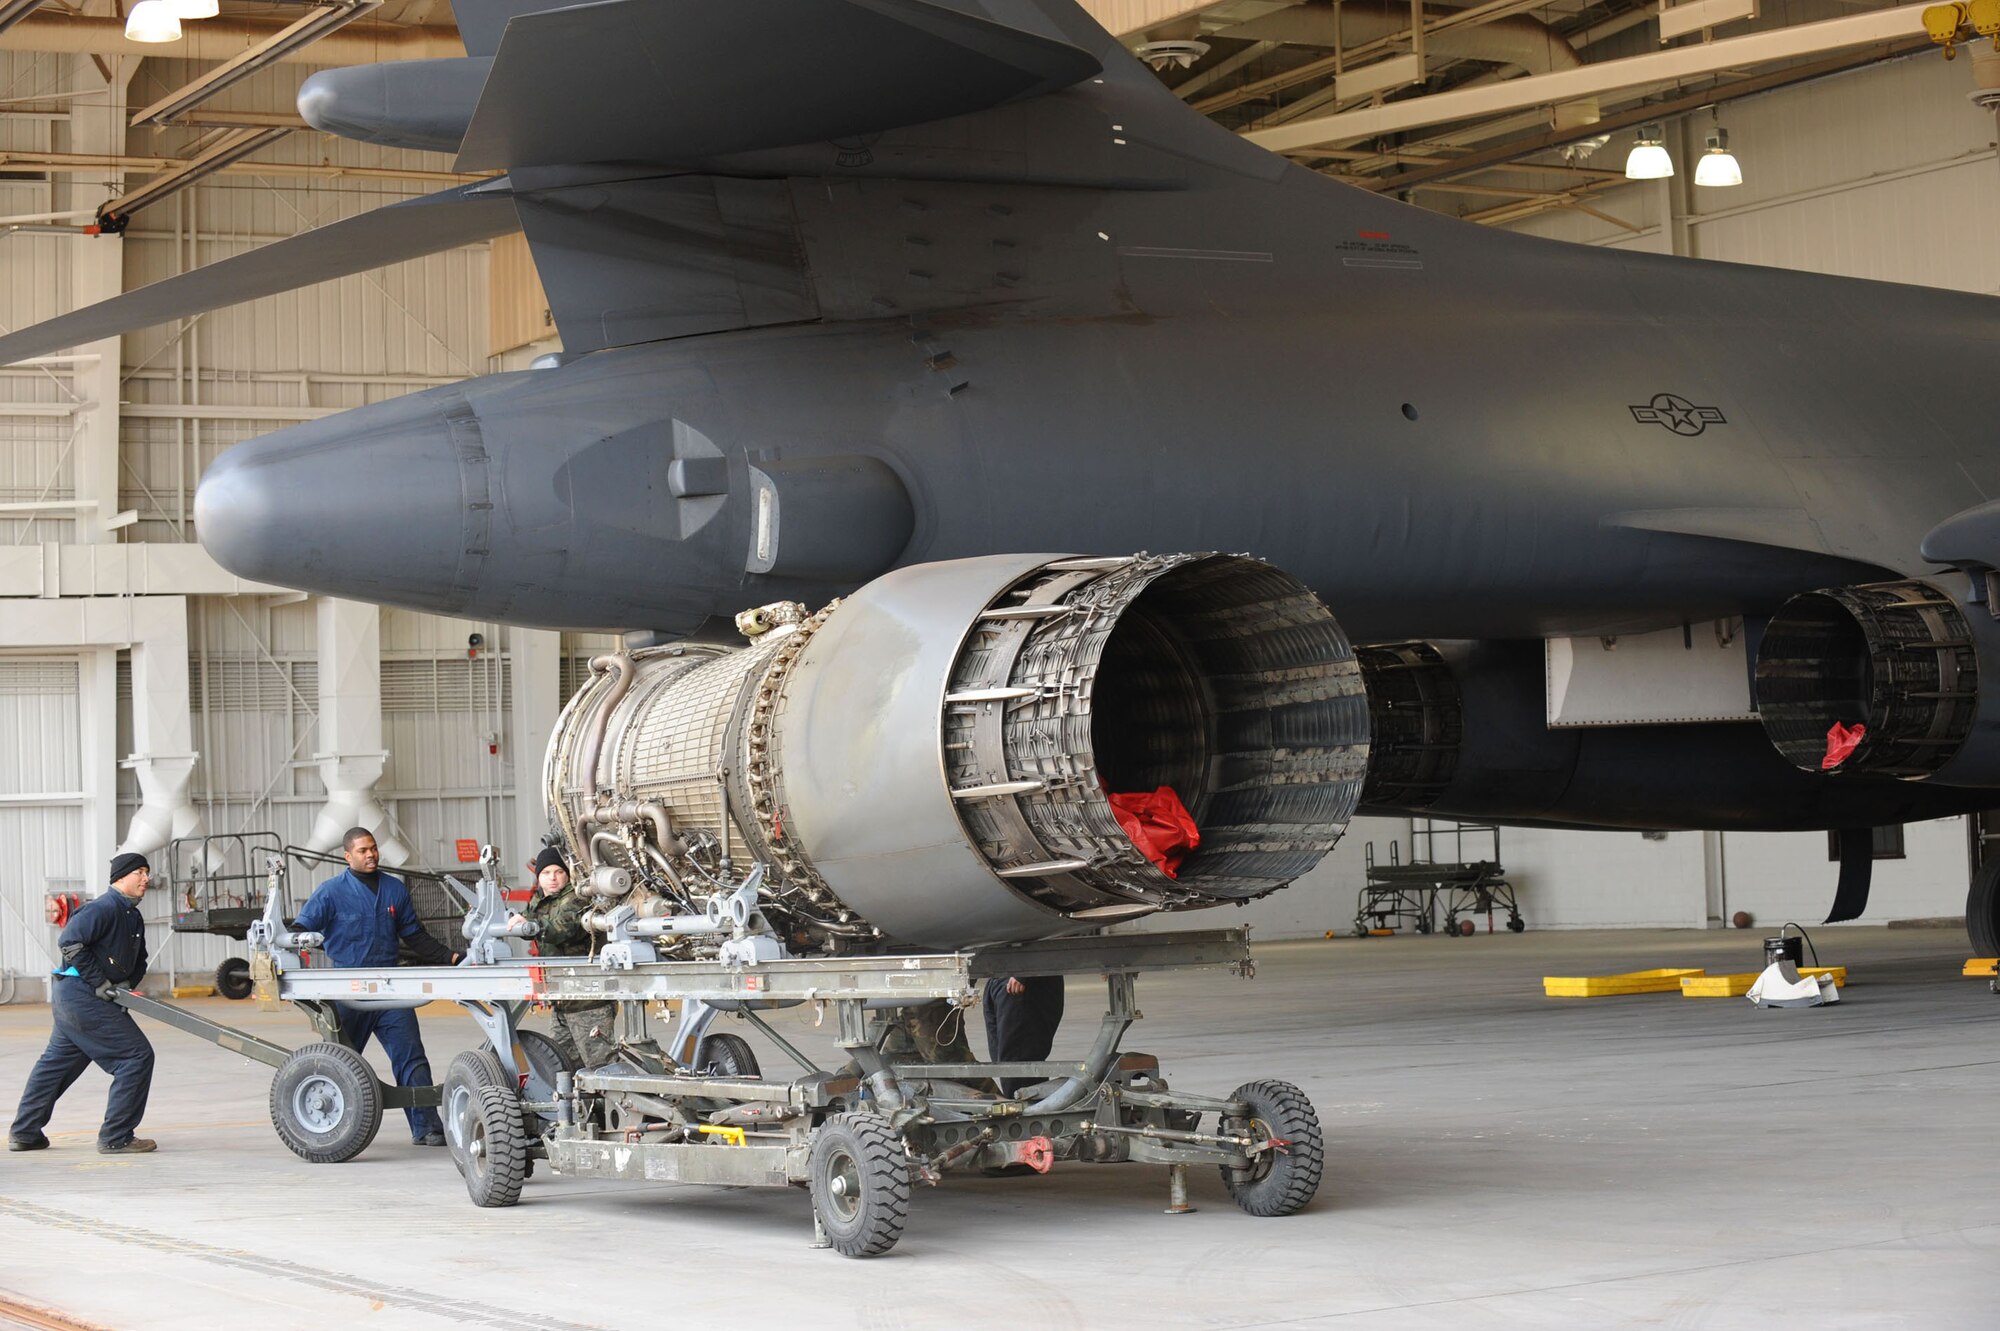 Members of the 7th Bomb Wing perform maintenance on a B-1B Lancer during the operational readiness inspection Jan. 6 at Dyess Air Force Base, Texas. The wing was graded on its ability to generate aircraft, deploy and regenerate aircraft.  (U.S. Air Force photo/Senior Airman Domonique Simmons)